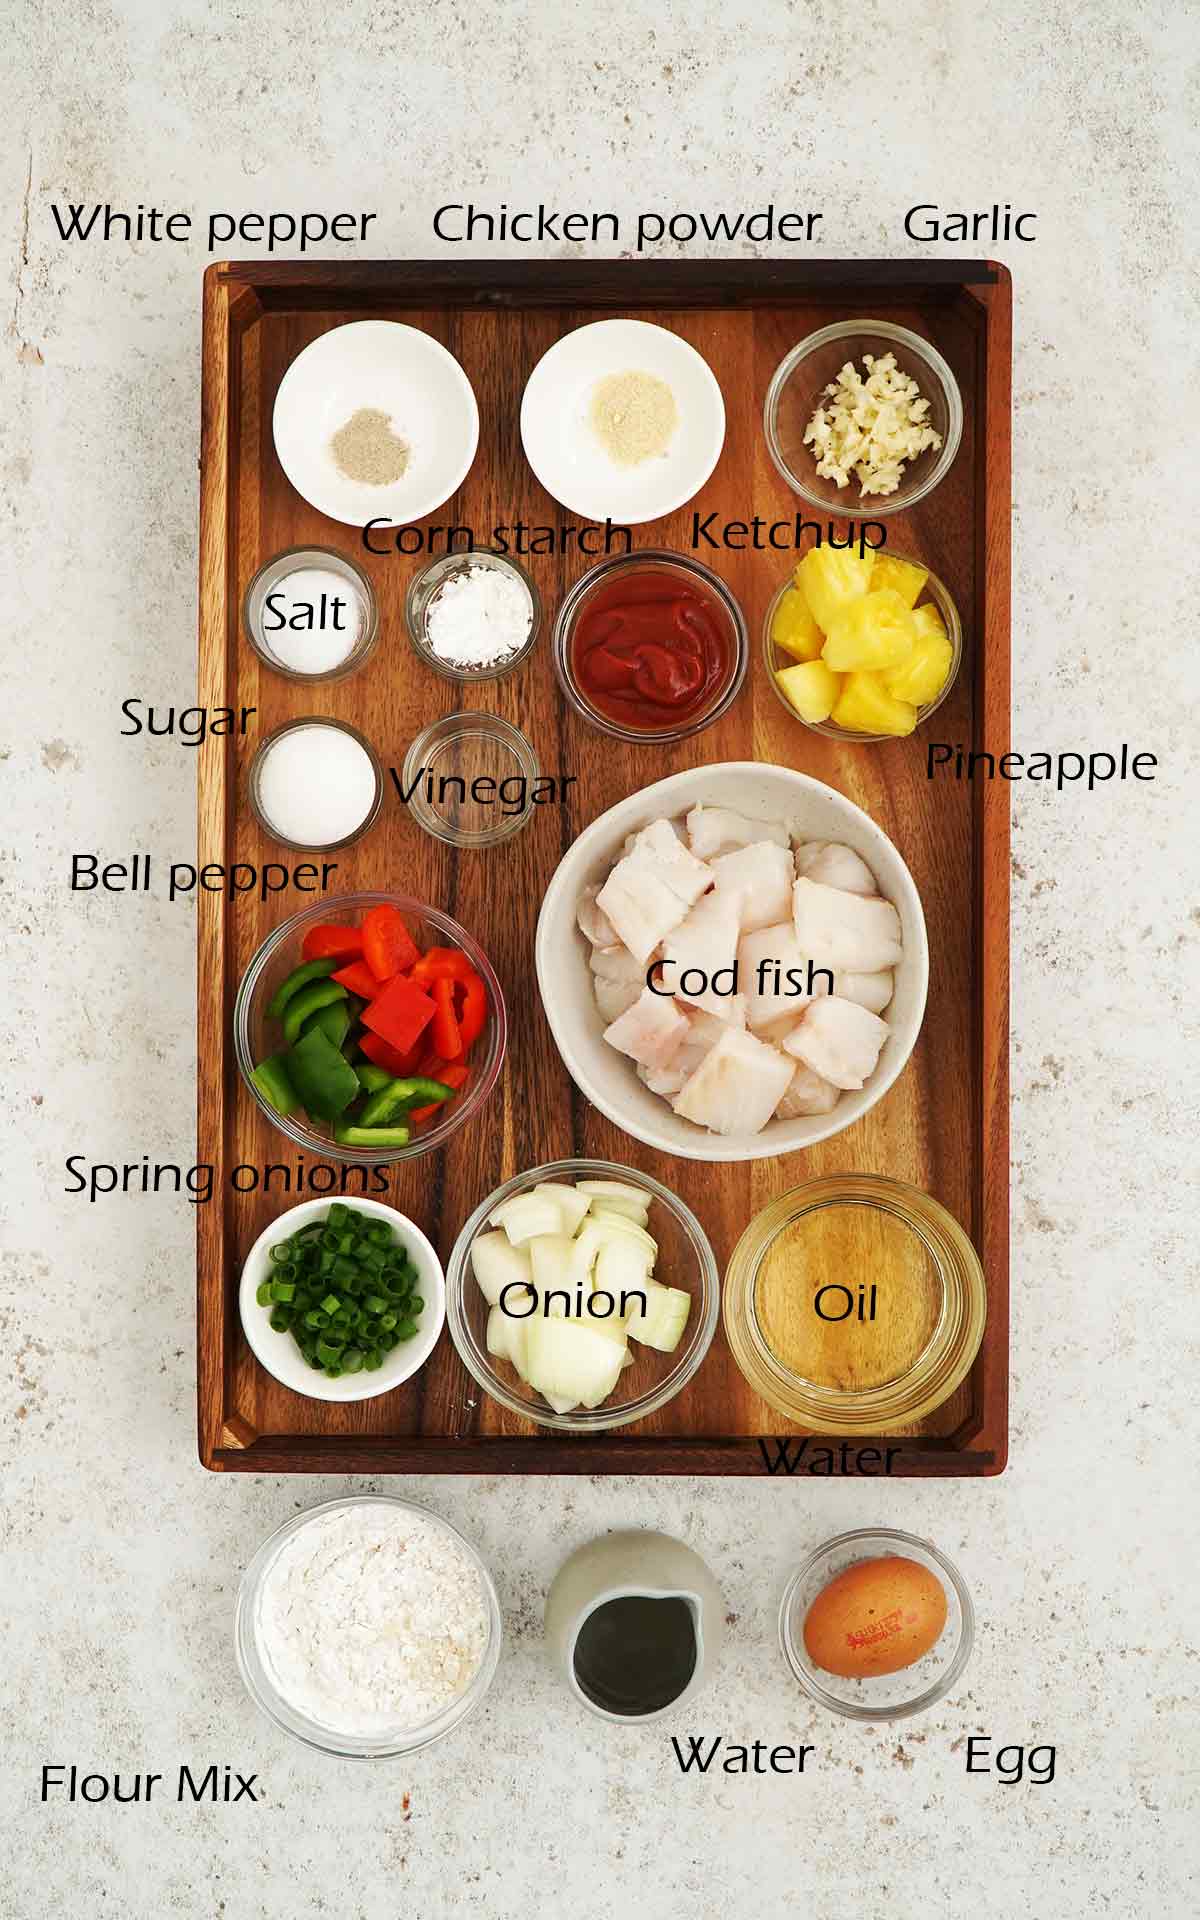 Labelled ingredients displayed on the wooden tray.